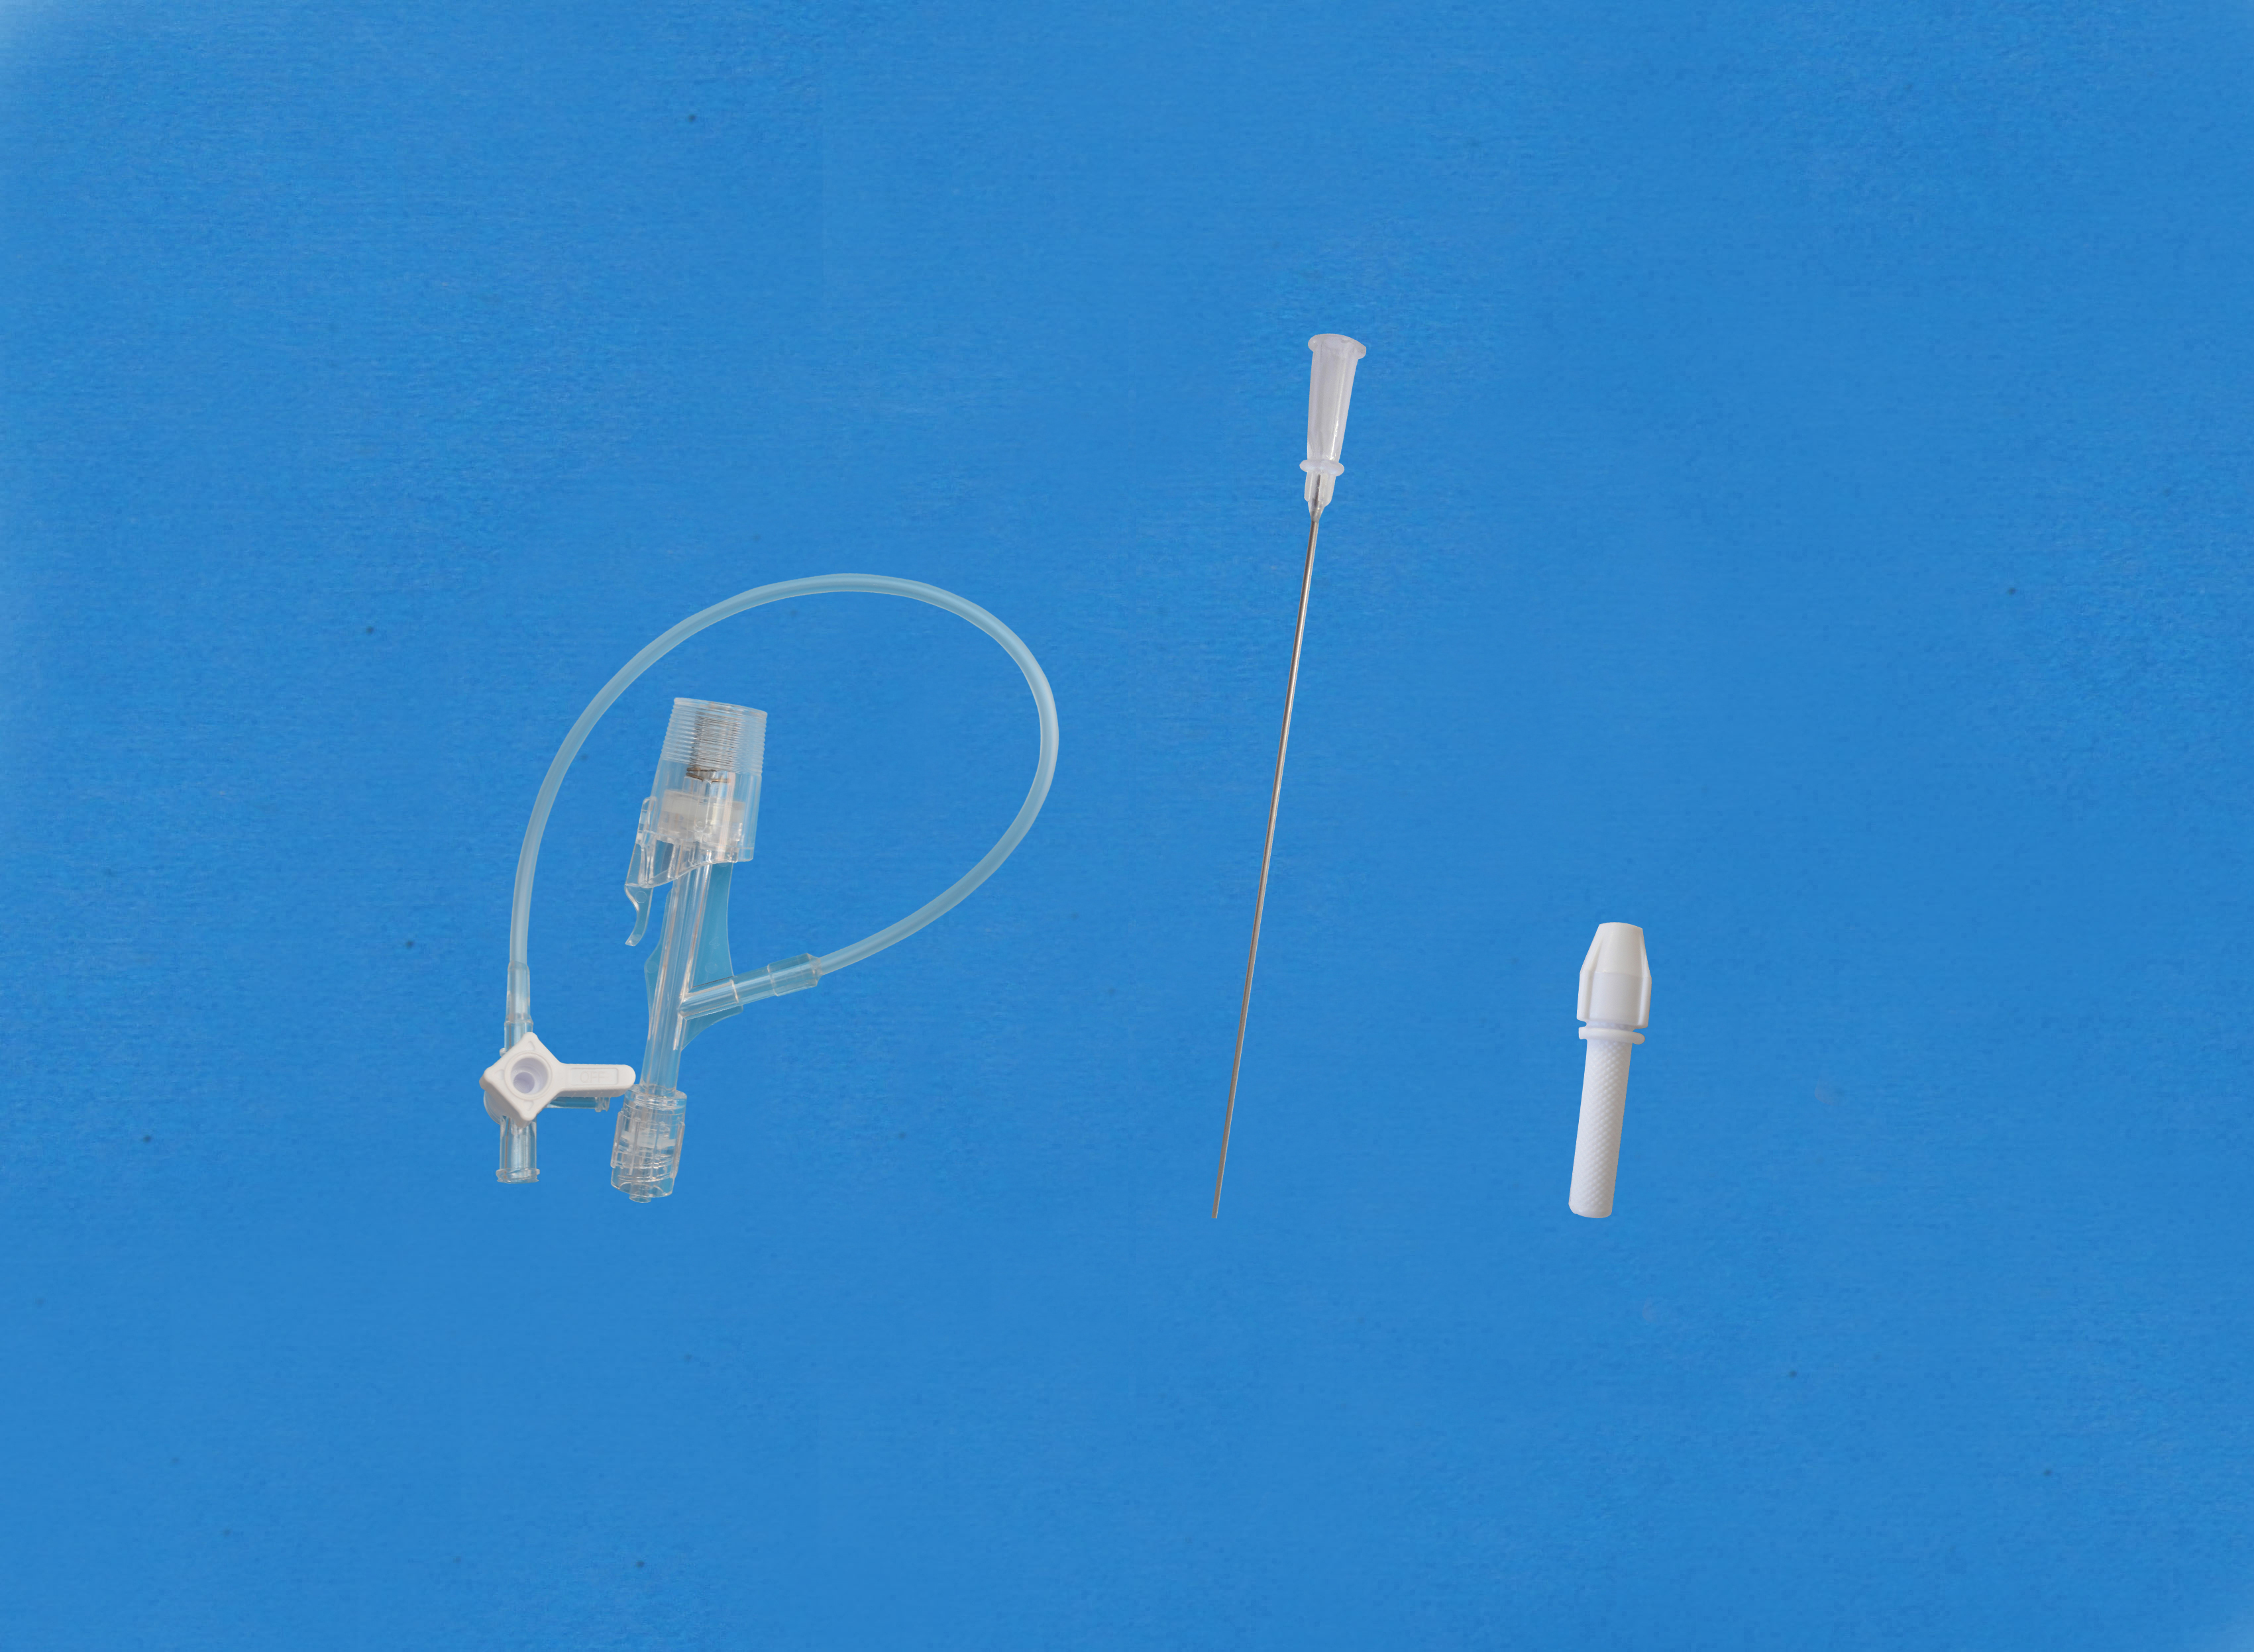 Haemostatic valves, Y click, Sideon Tubing and Stopcock, Insertion Tool with Small Hub, White/Copper Torquer